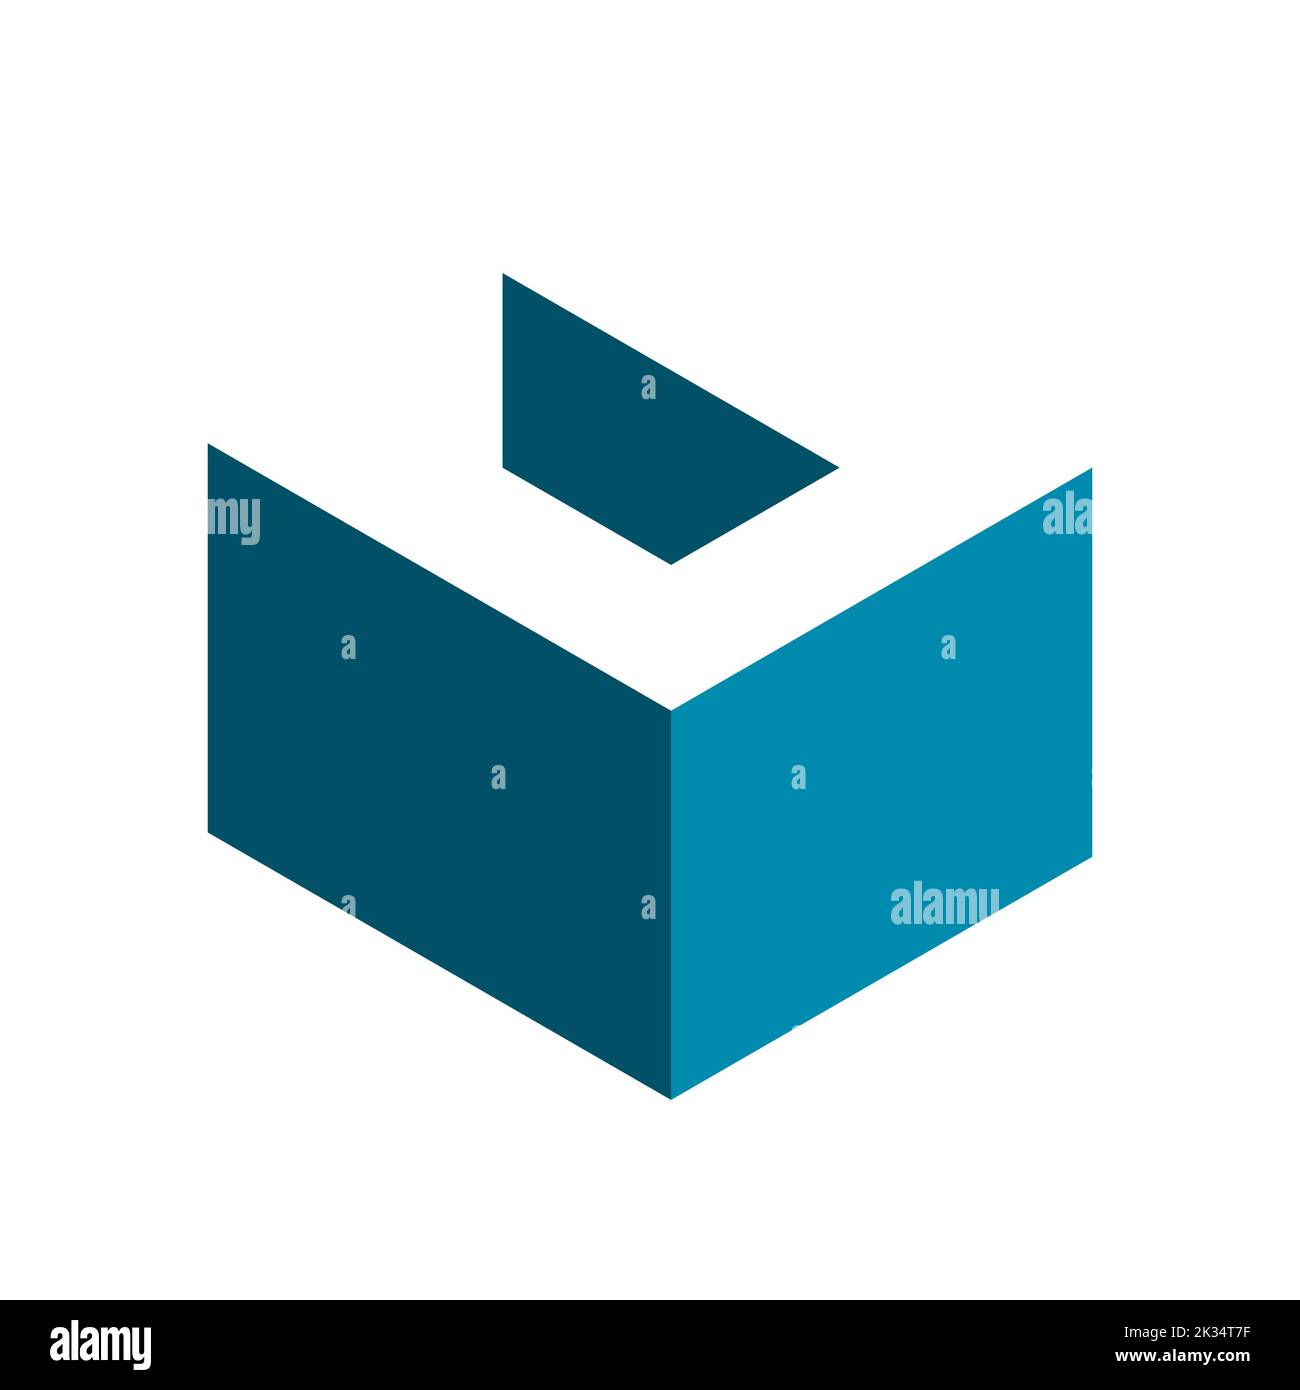 Letter U cube logo. 3D isometric block shape with long shadow effect. Blue box with white letter U on top. Construction industry symbol. Vector Stock Vector